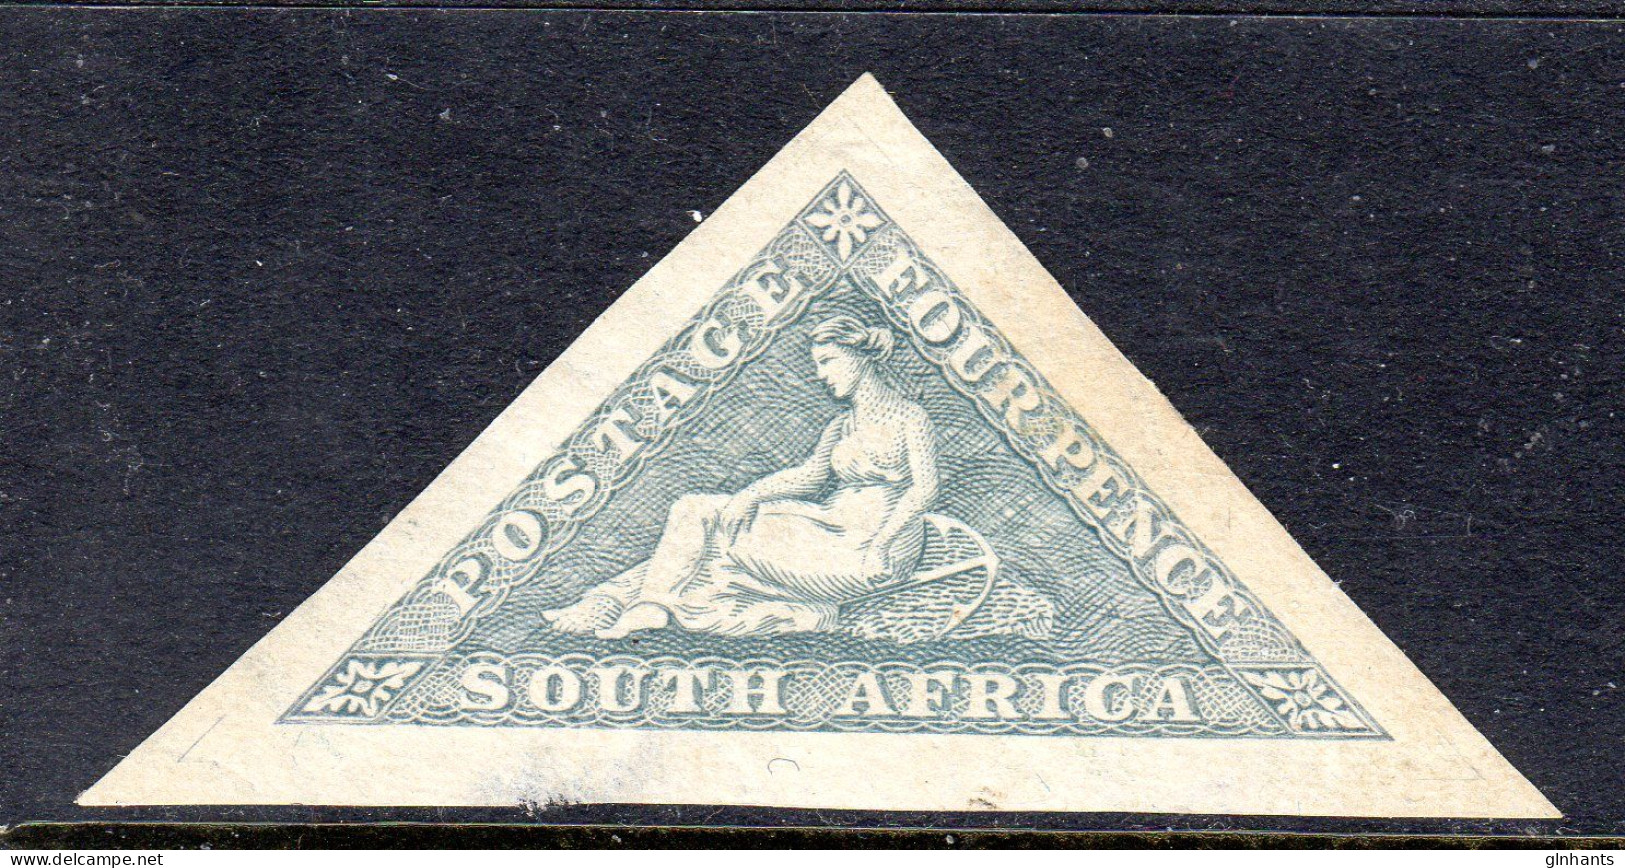 SOUTH AFRICA - 1926 HOPE 4d STAMP ENGLISH FINE  MOUNTED MINT MM * SG 33 - Unused Stamps